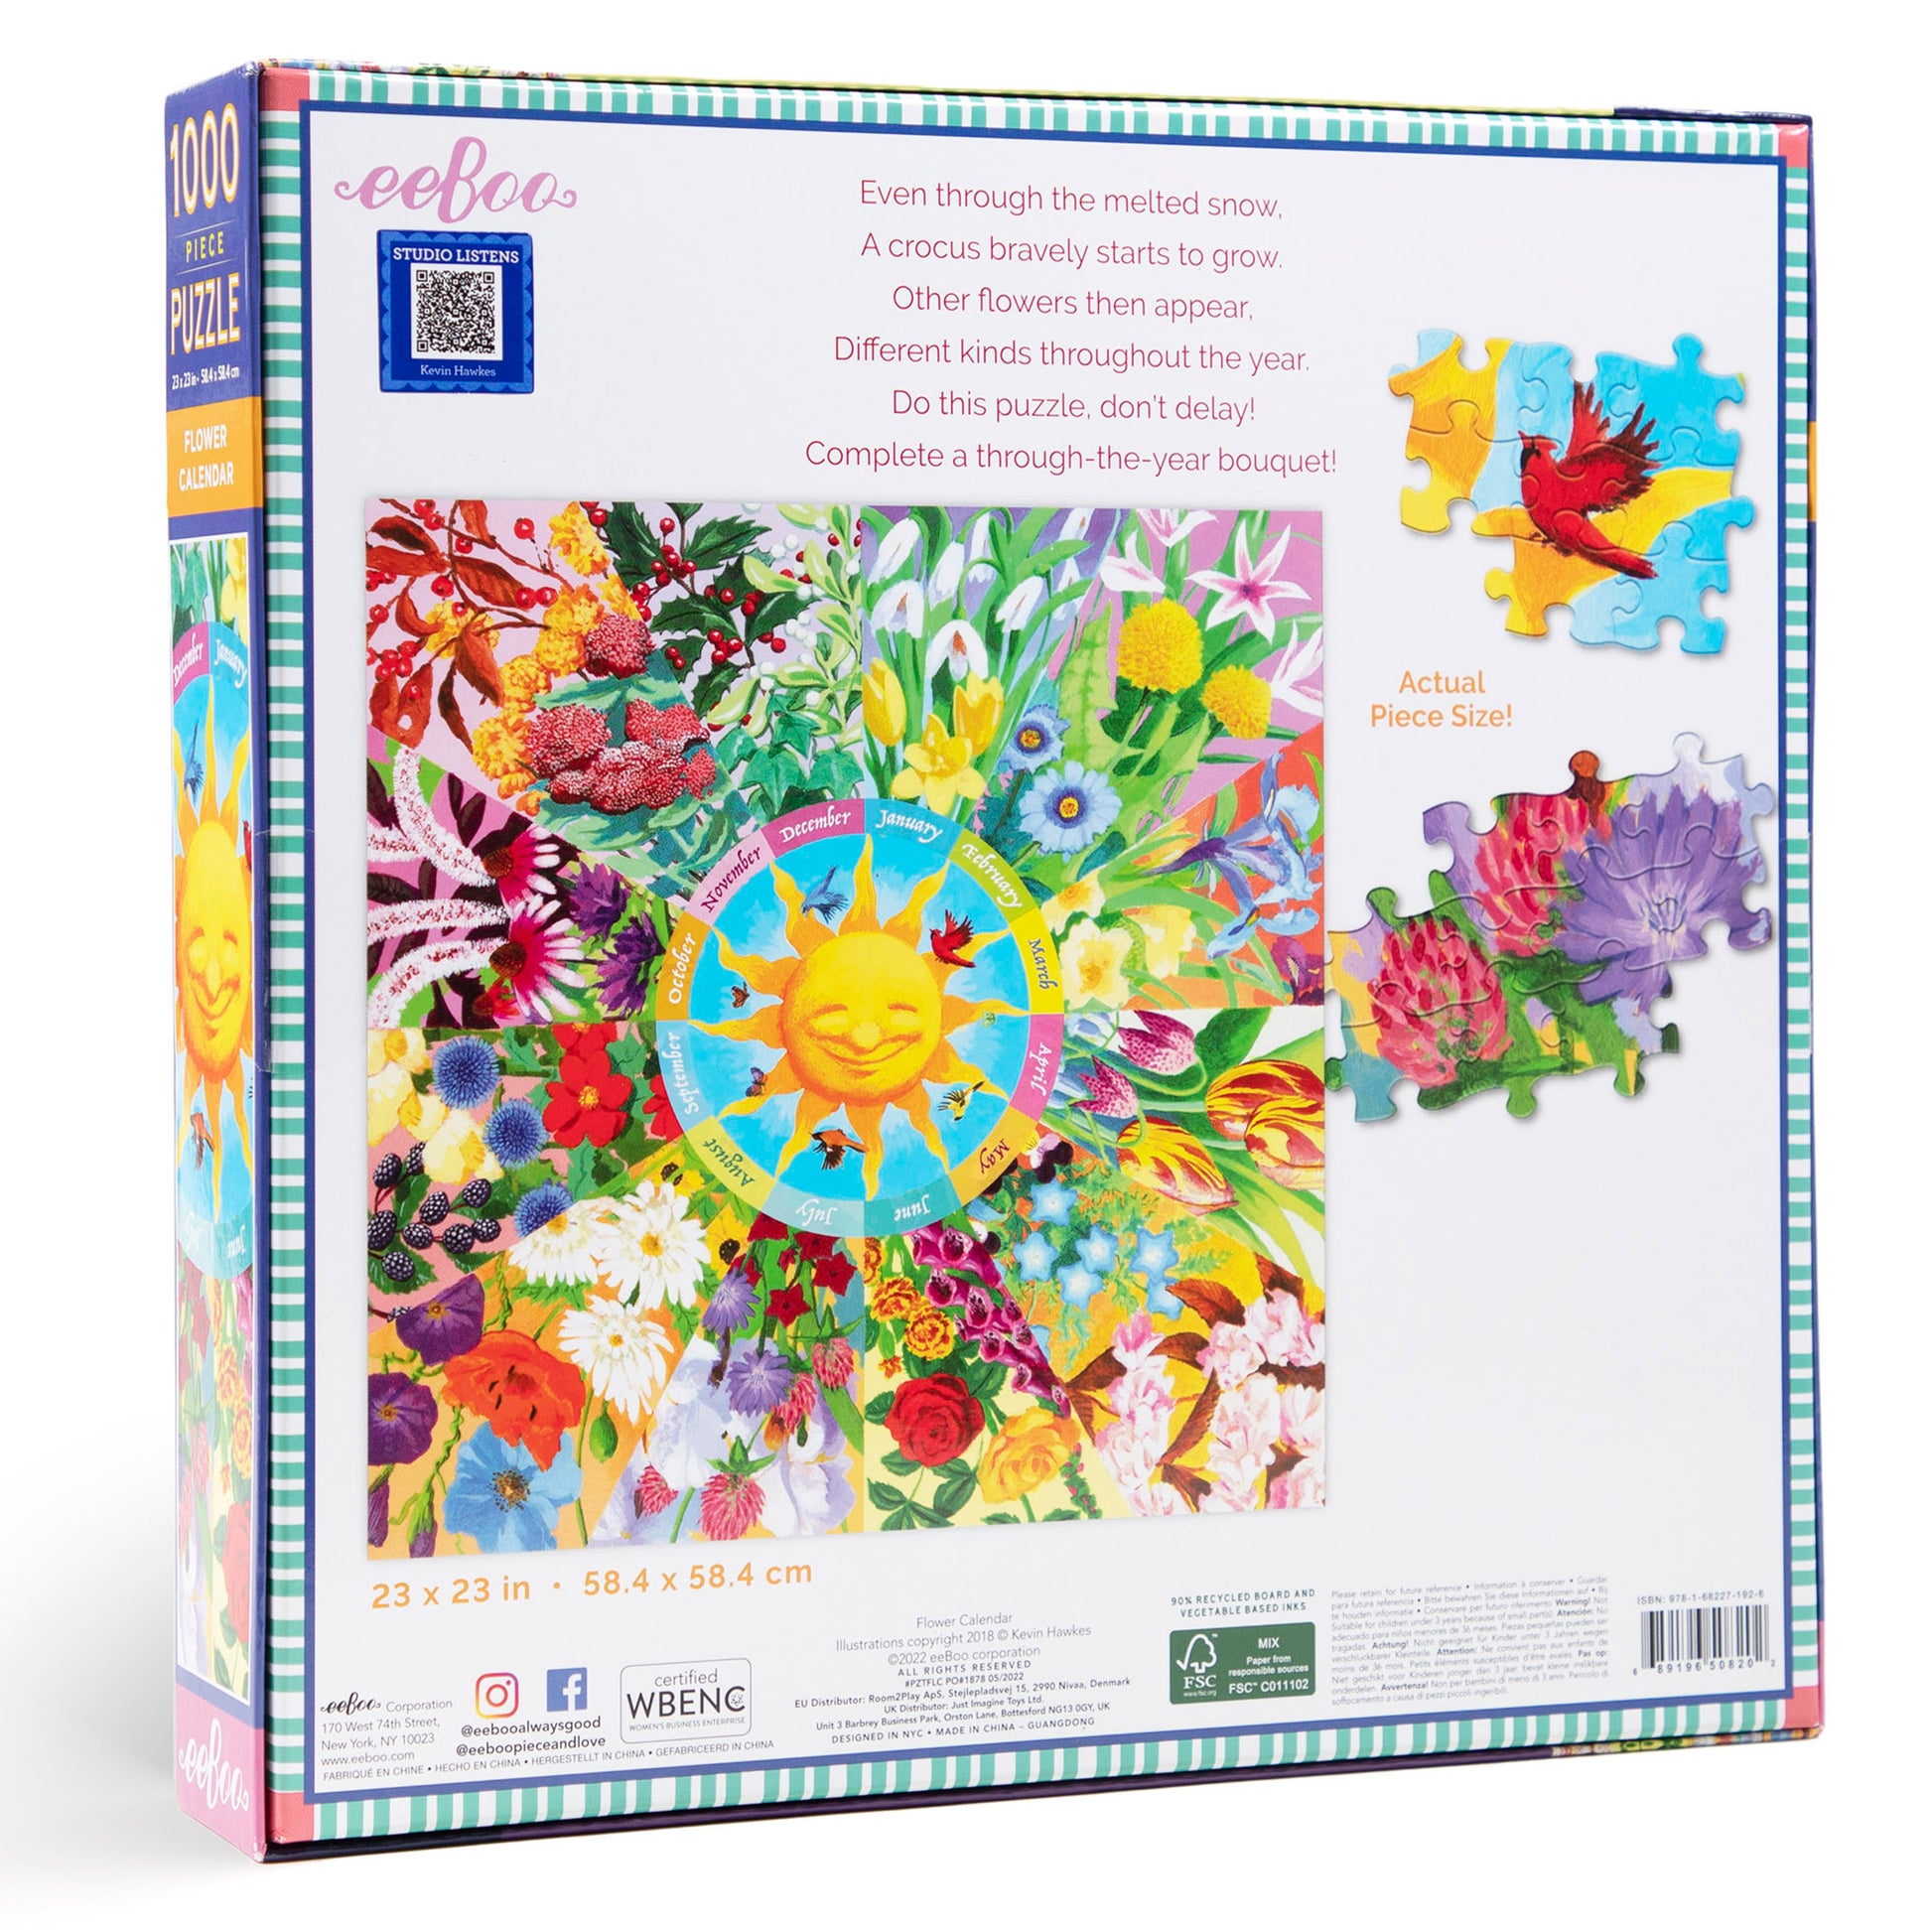 Flower Calendar 1000 Piece Square Jigsaw Puzzle eeBoo Gifts for Garden Lovers, Plant Enthusiasts, Flower Connoisseurs 14+